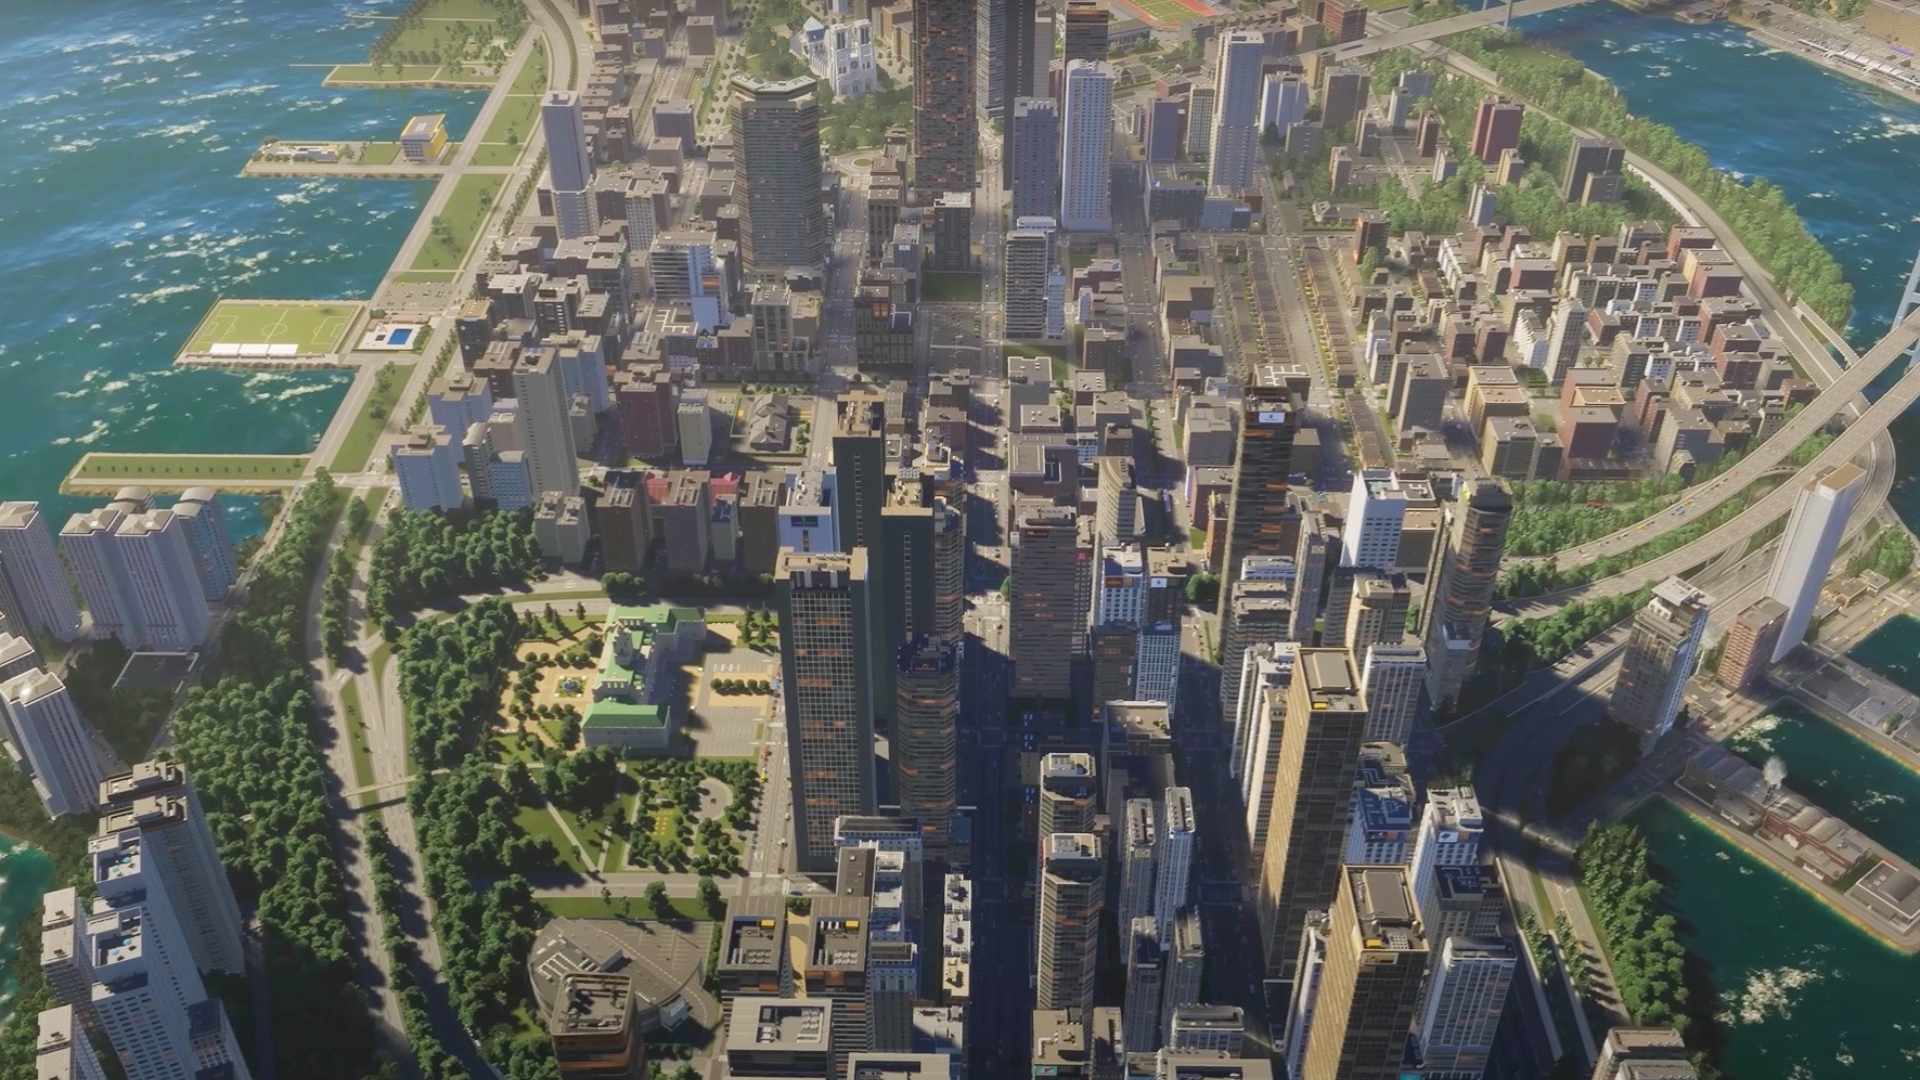 Cities Skylines 2 CEO apologizes for “poor choice of words”